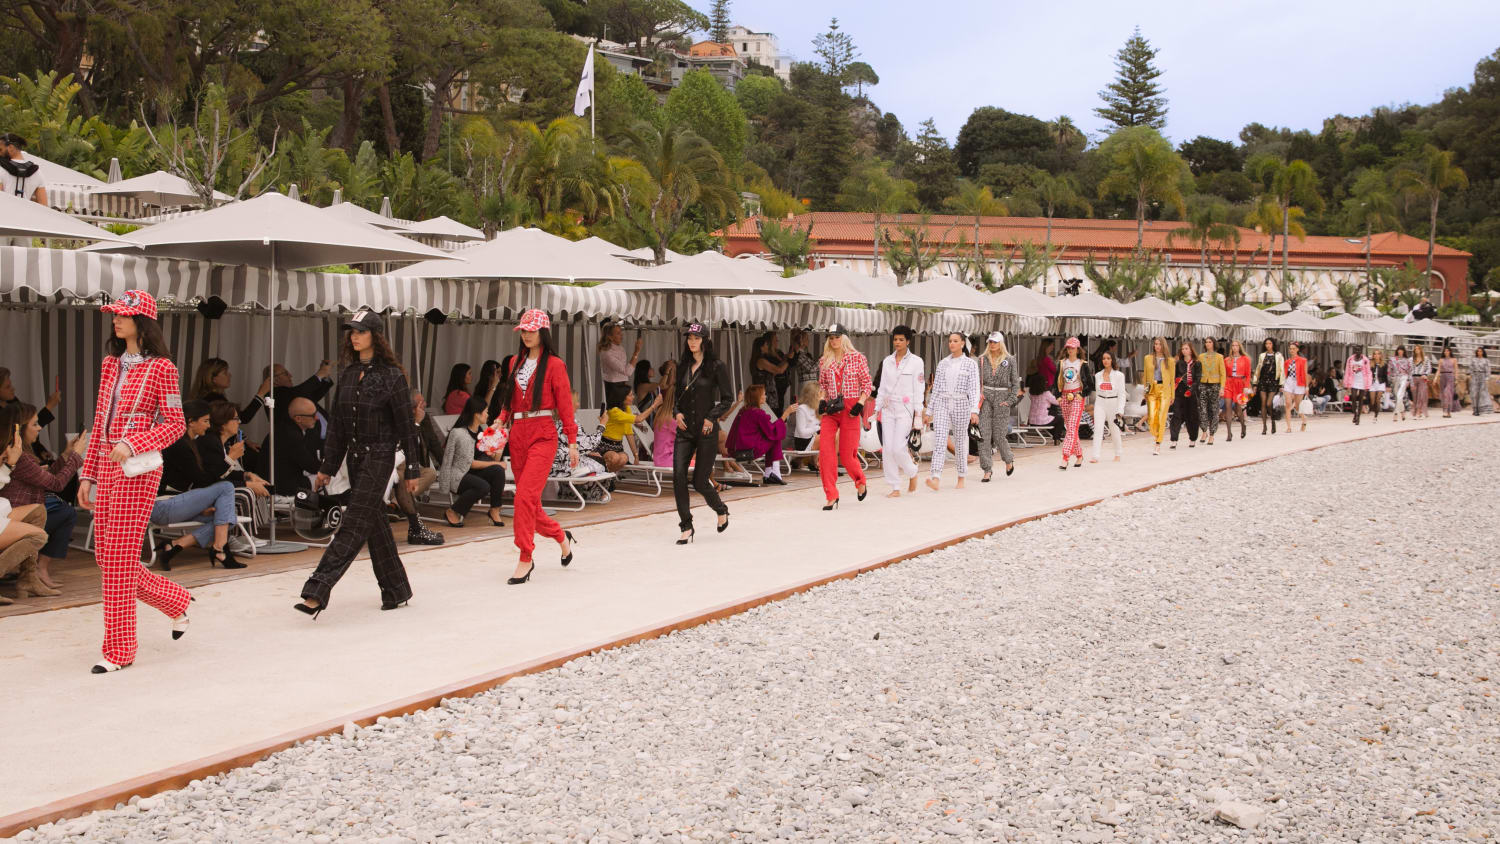 Formula 1 x casino chic was the mood at the Chanel Cruise show in Monaco